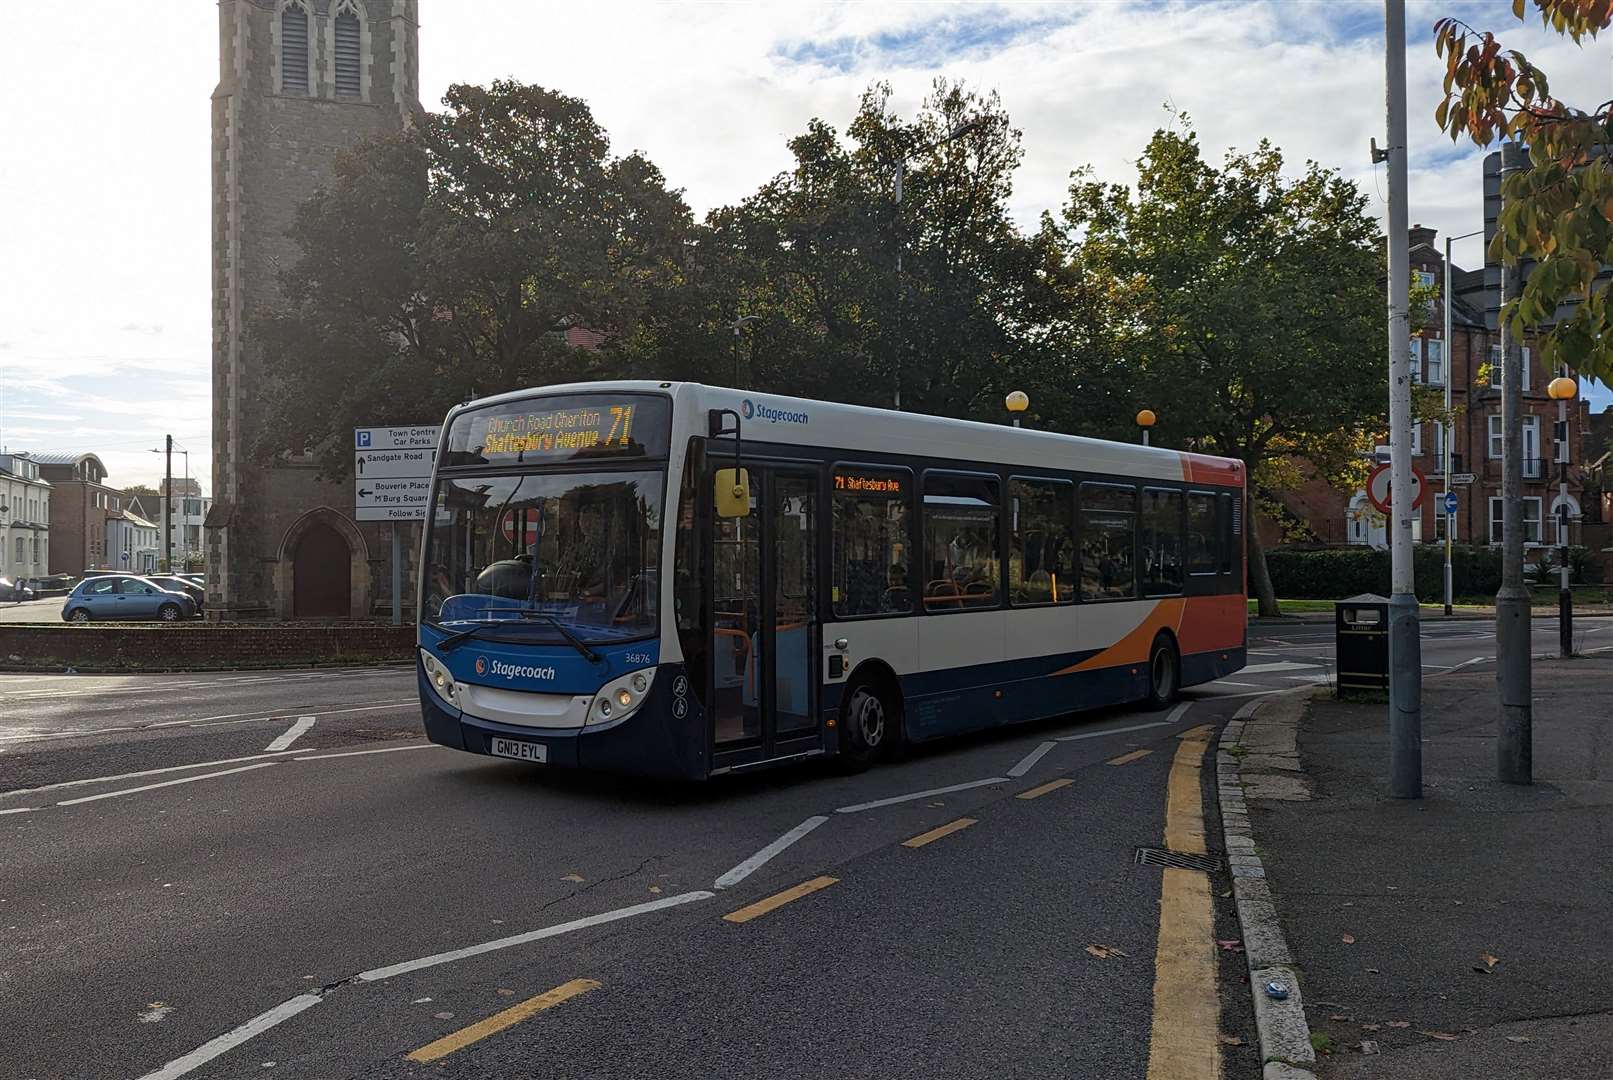 The bus timetable is being hit by lack of available drivers and vehicles